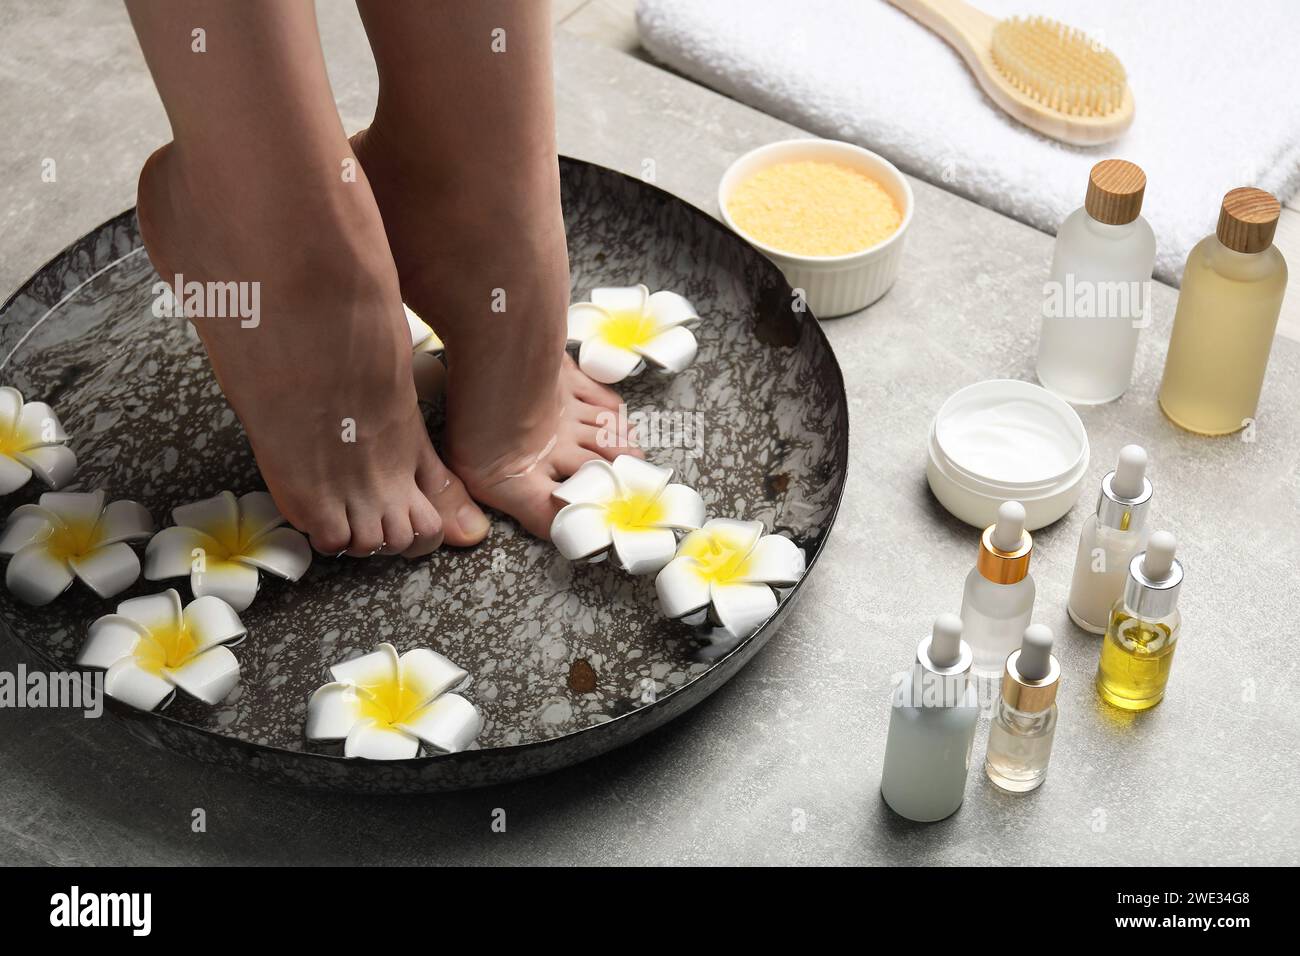 Woman soaking her feet in bowl with water and flowers on light grey floor, closeup. Spa treatment Stock Photo